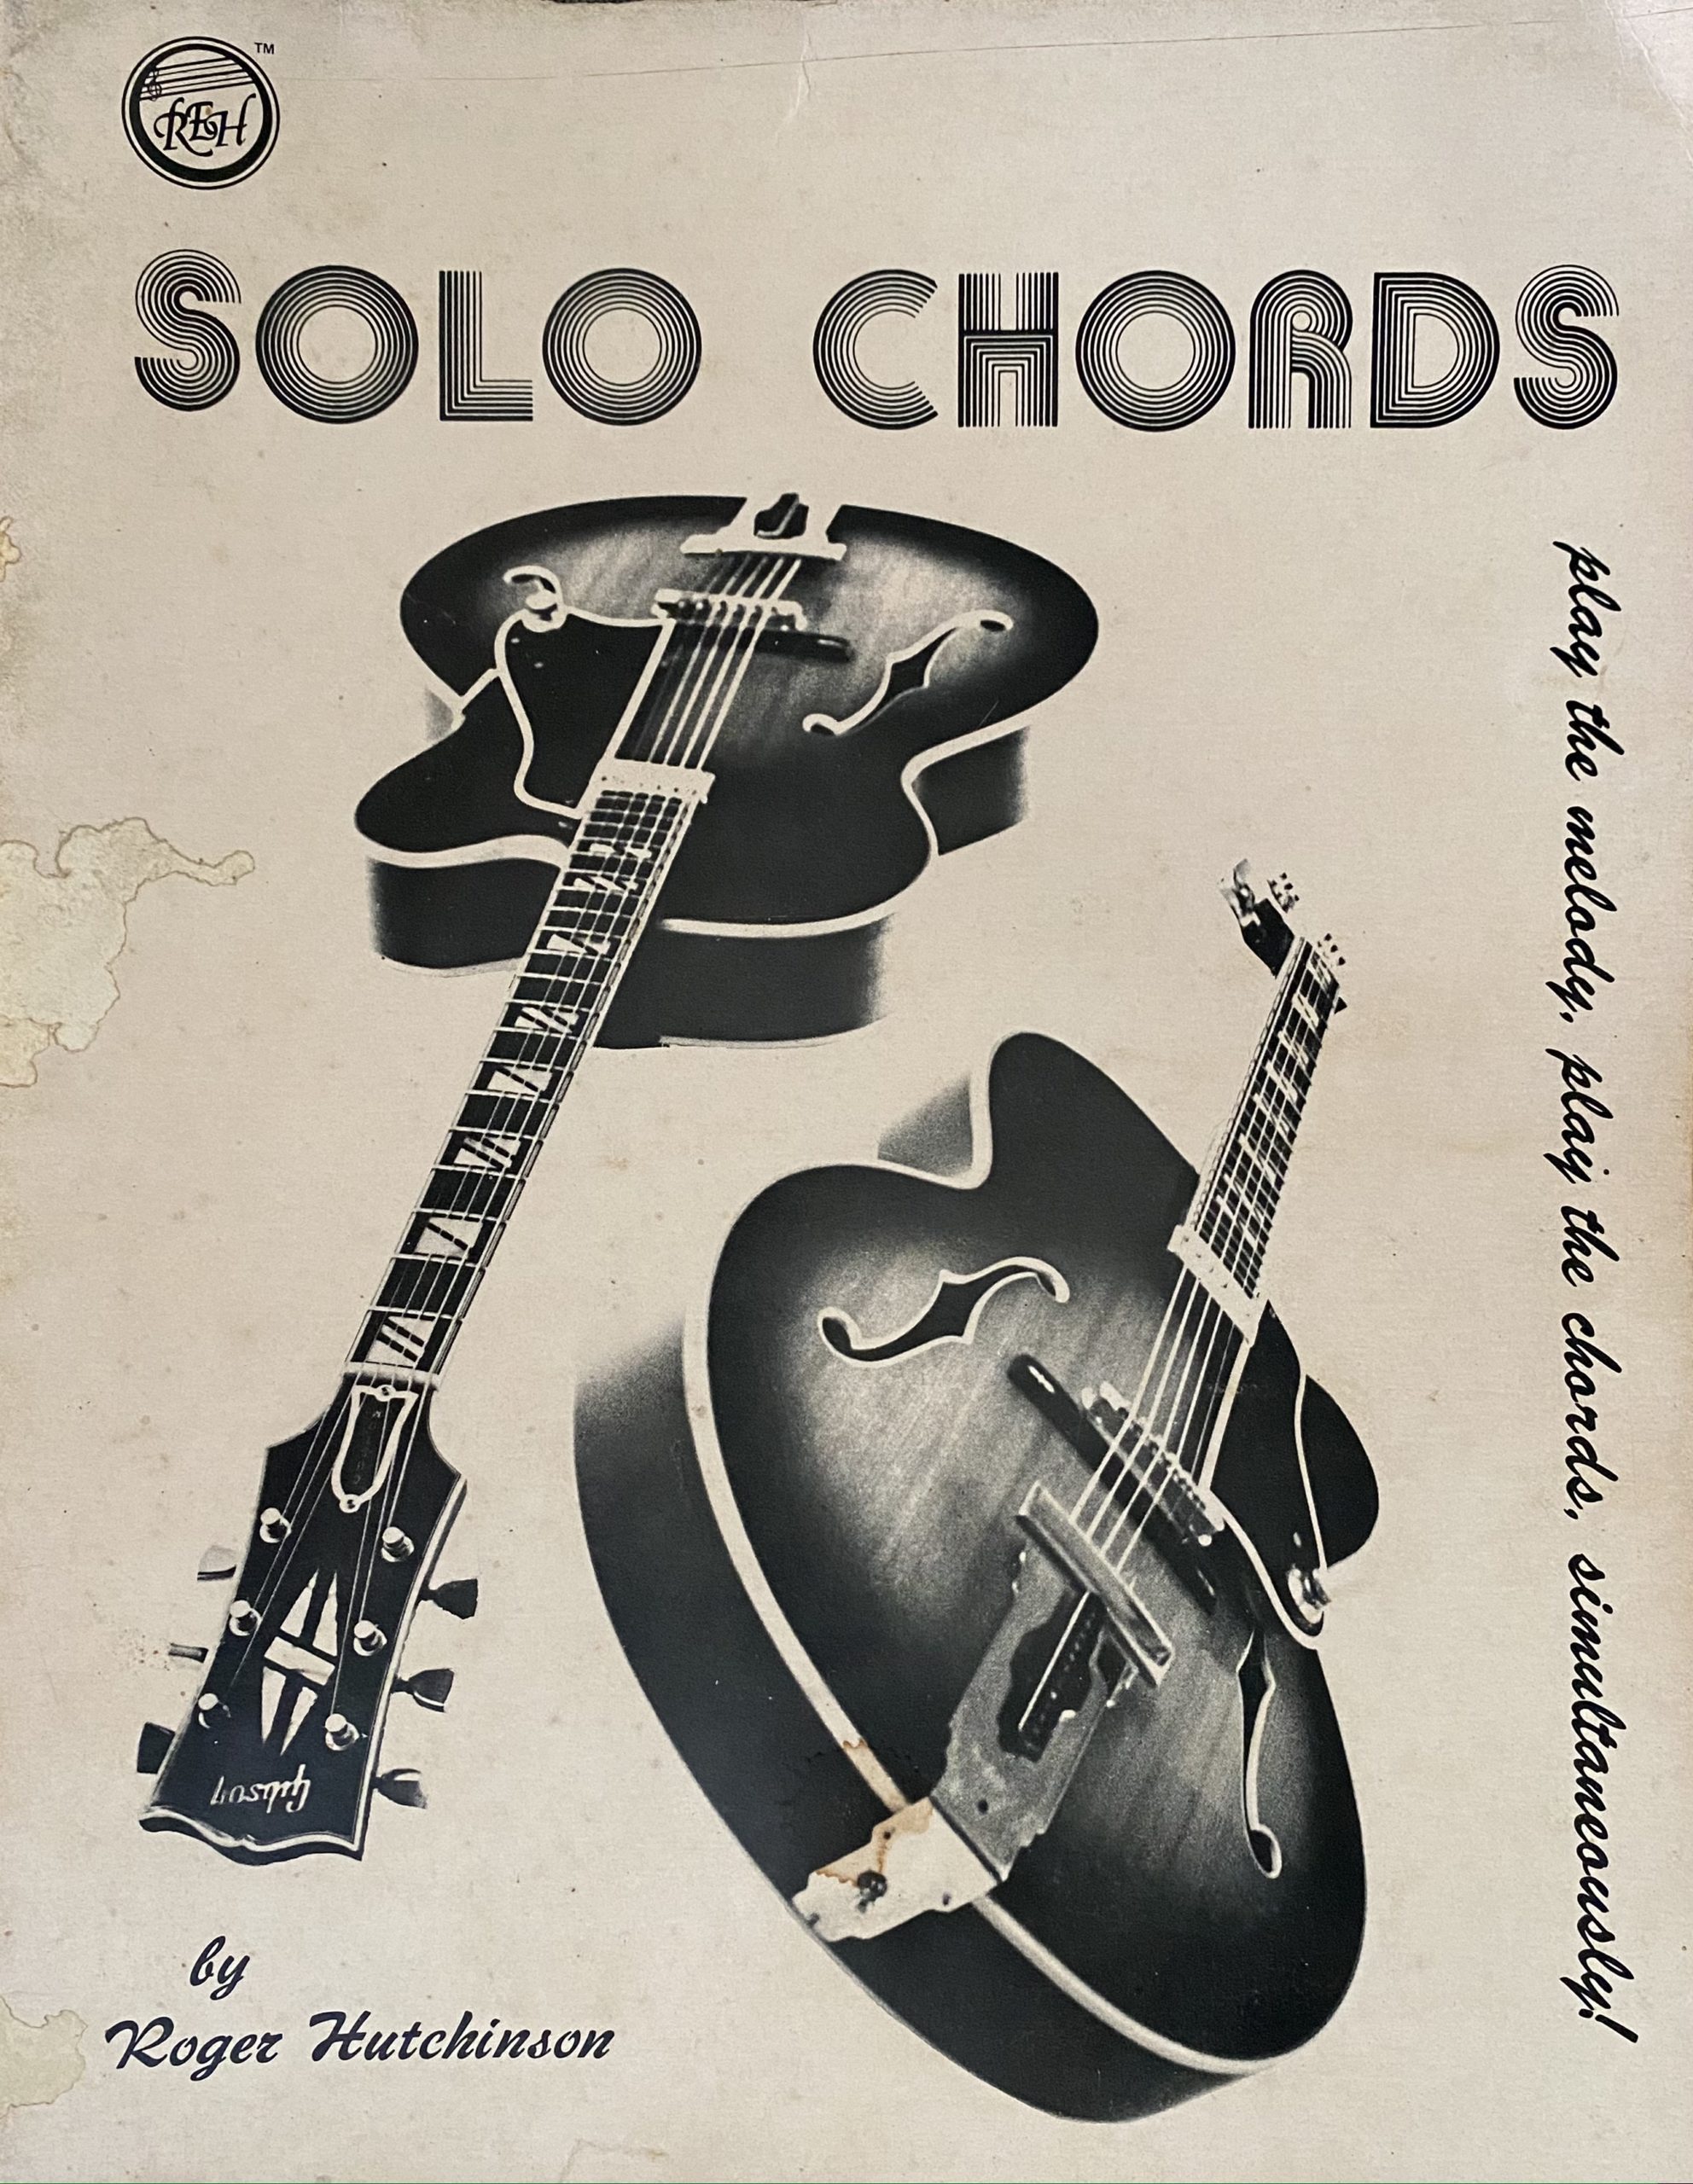 Book Review: The Melodic Jazz Guitar Chord Dictionary by Tim Lerch